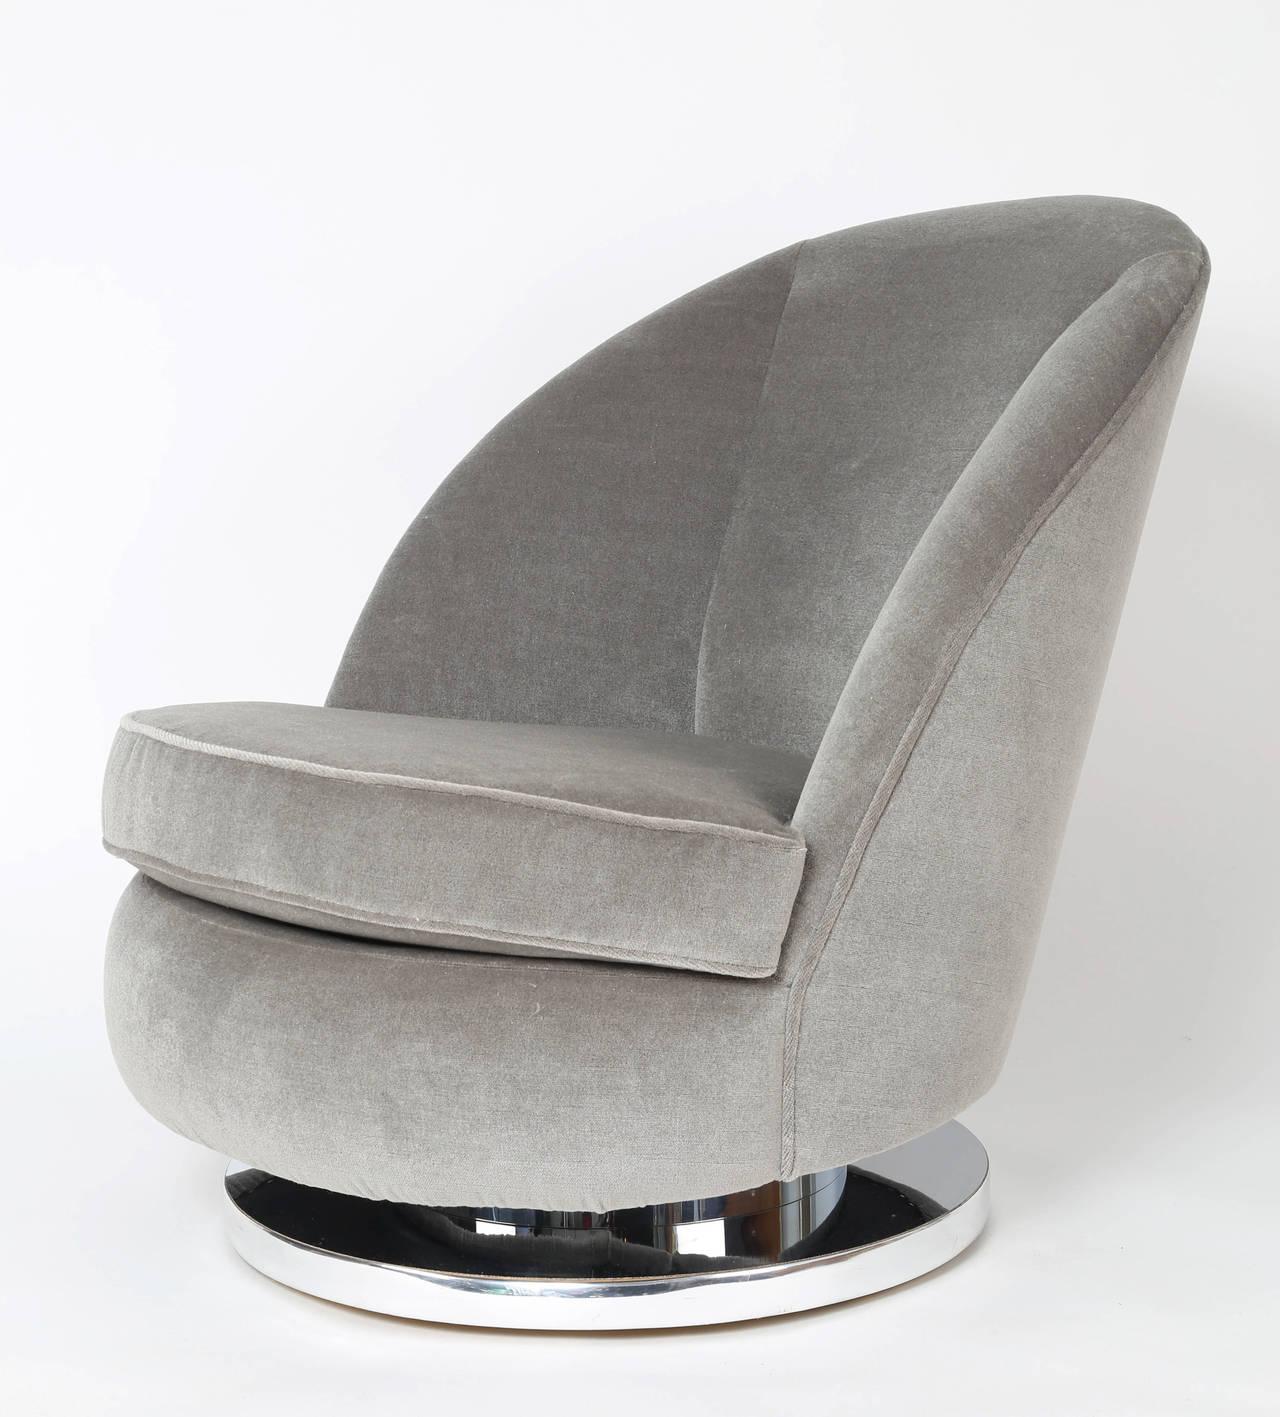 Late 20th Century Milo Baughman Tilt and Swivel Lounge Chairs in Grey